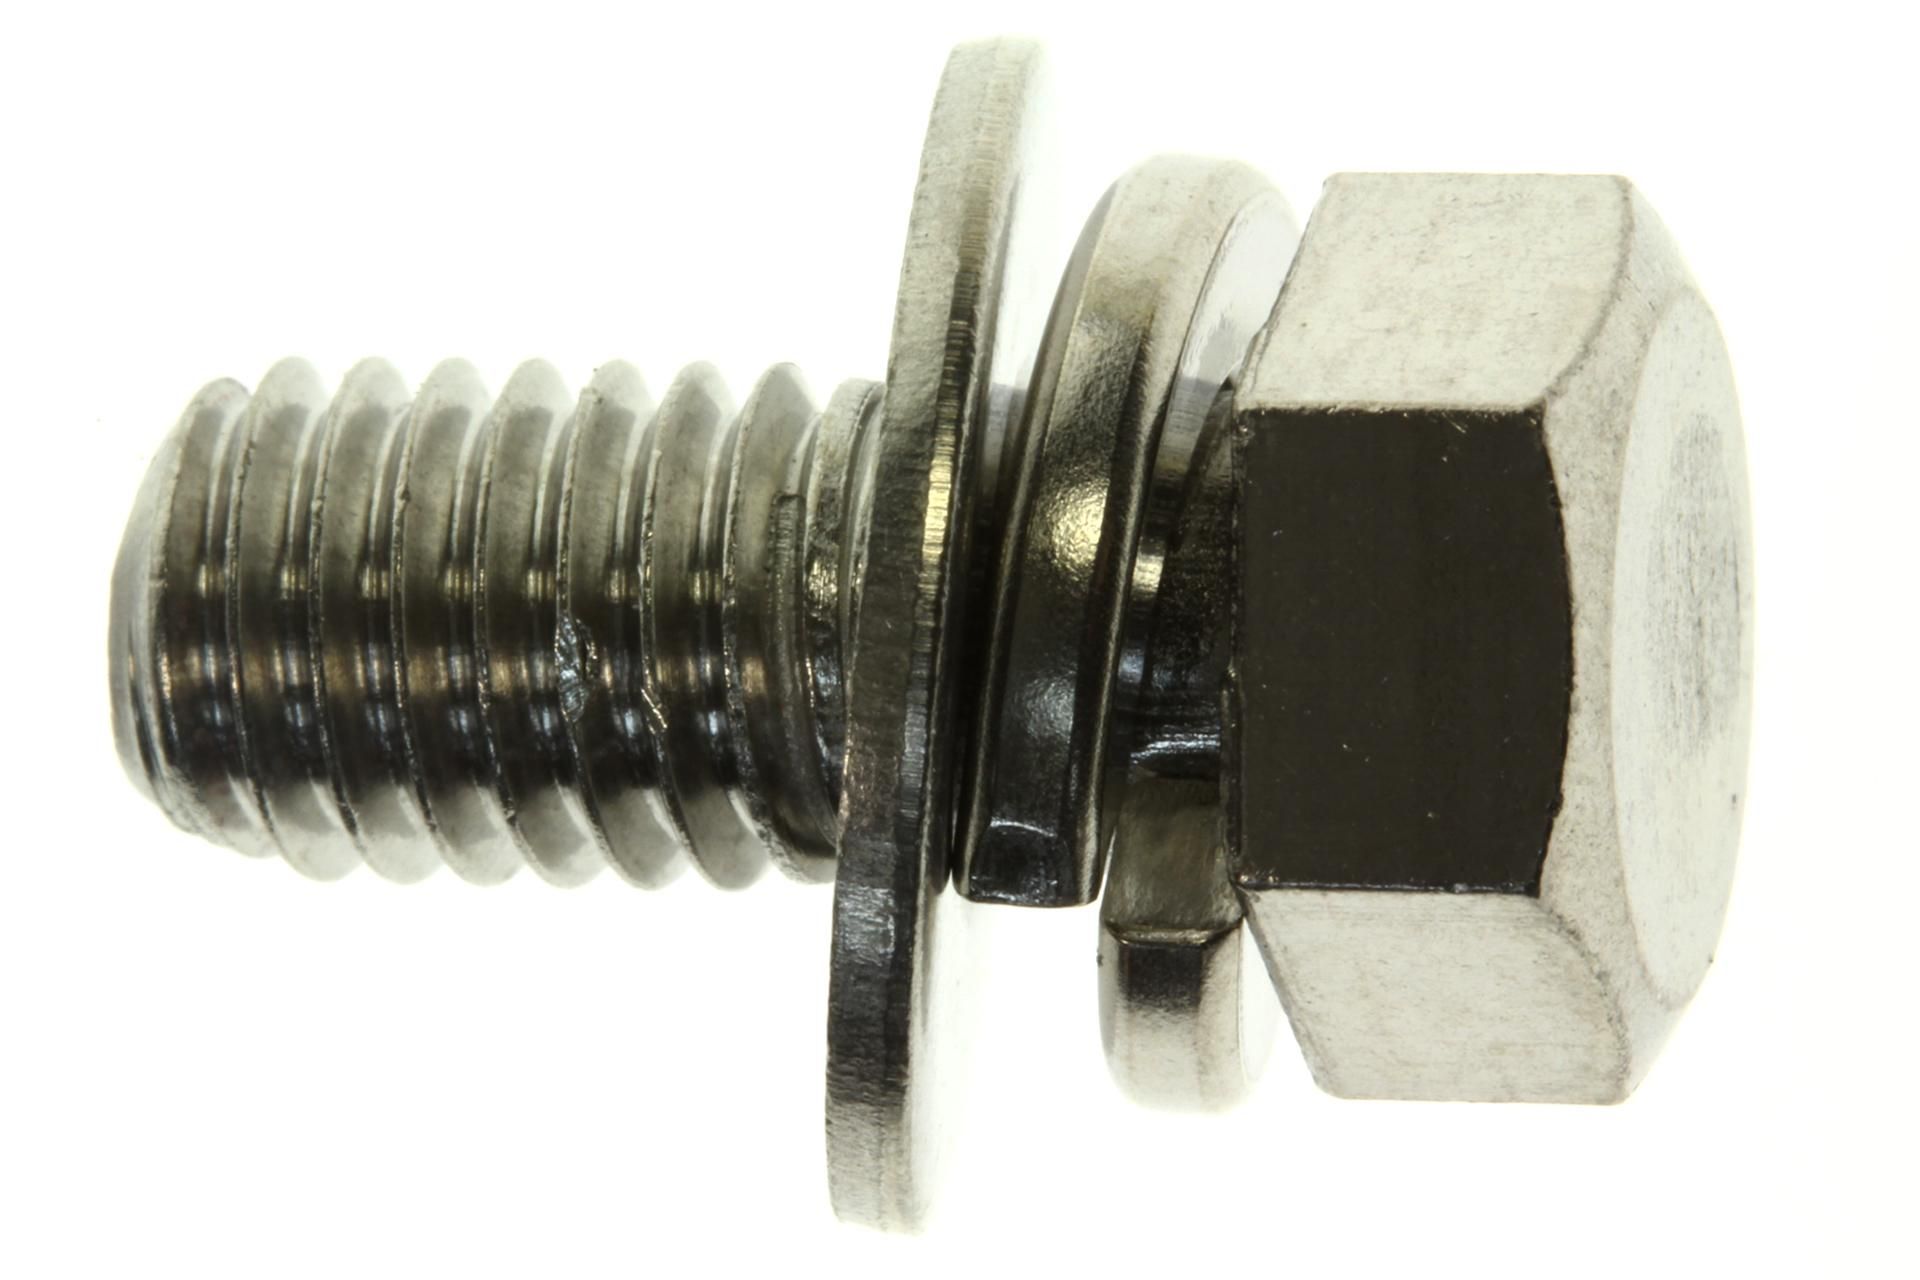 90119-089U7-00 Superseded by 90119-08800-00 - BOLT, WITH WASHER